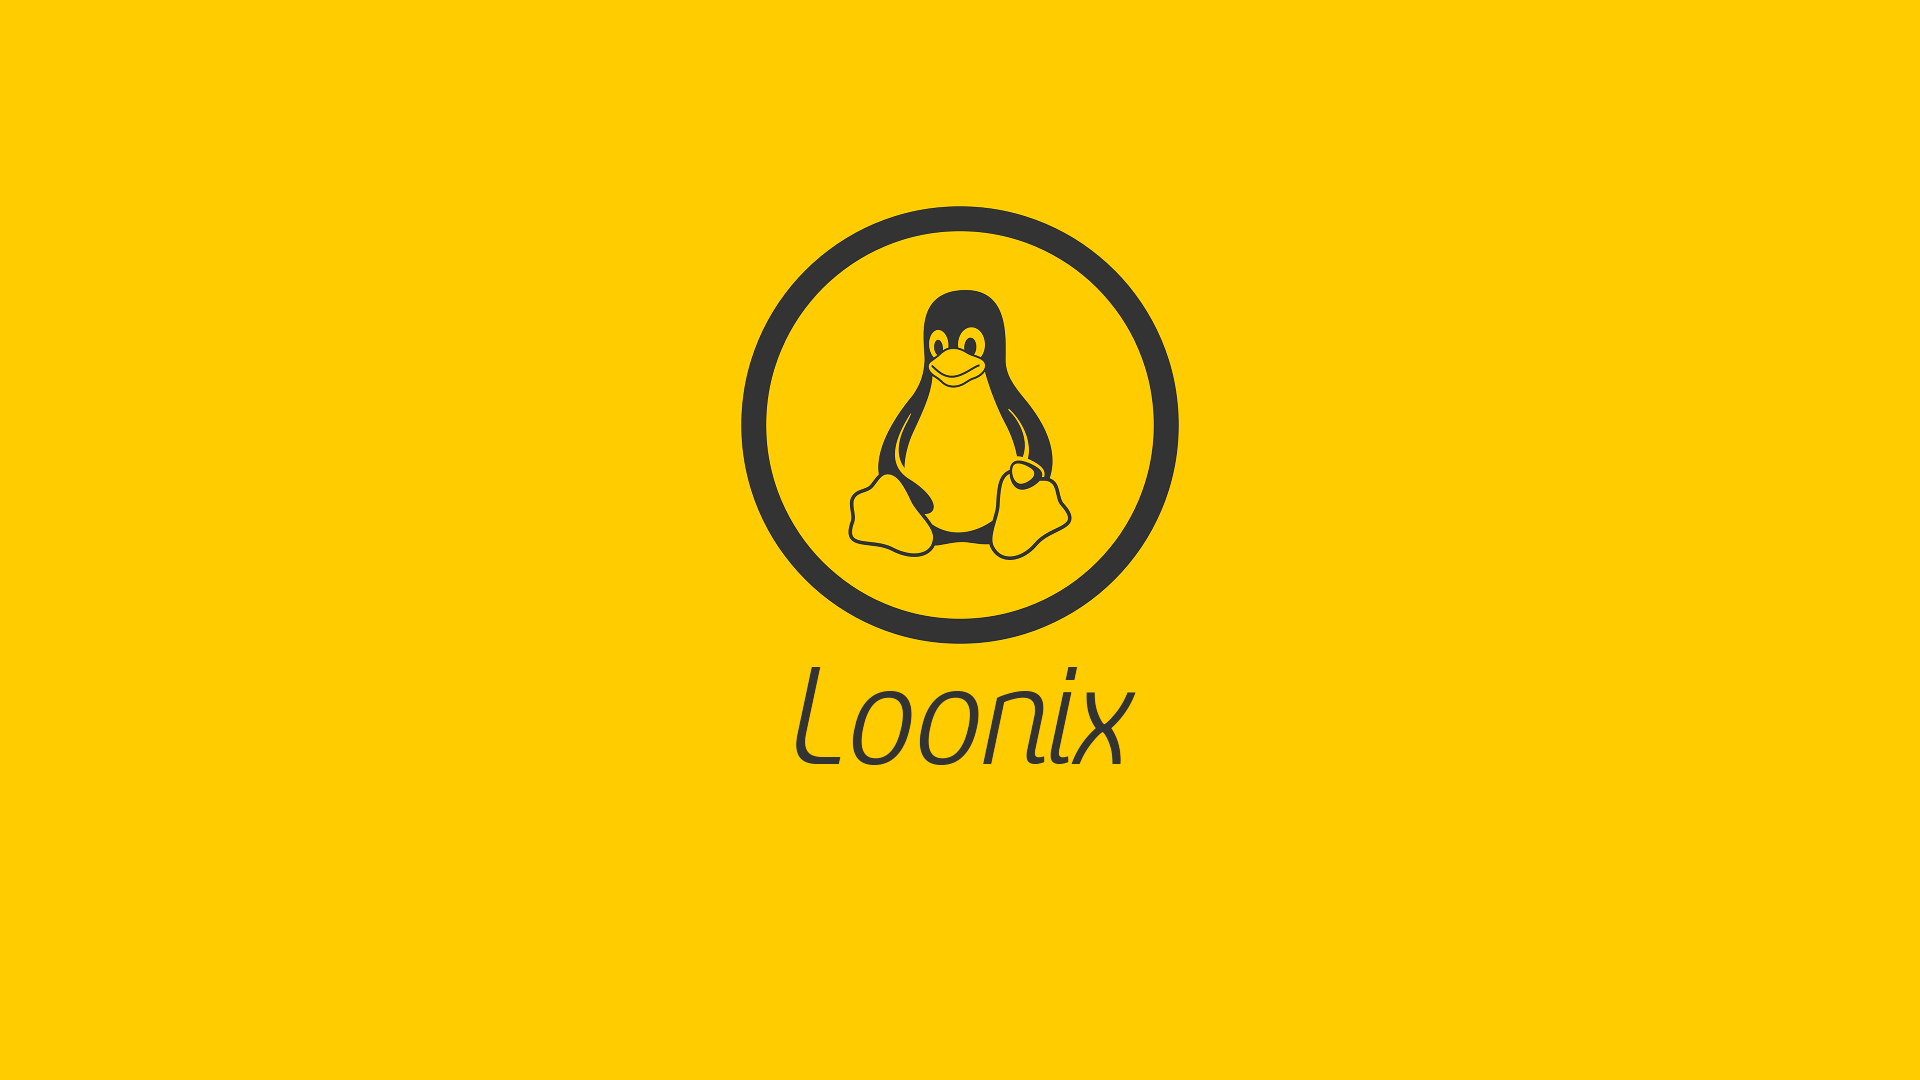 General 1920x1080 Linux yellow background penguins operating system simple background Tux logo animals circle